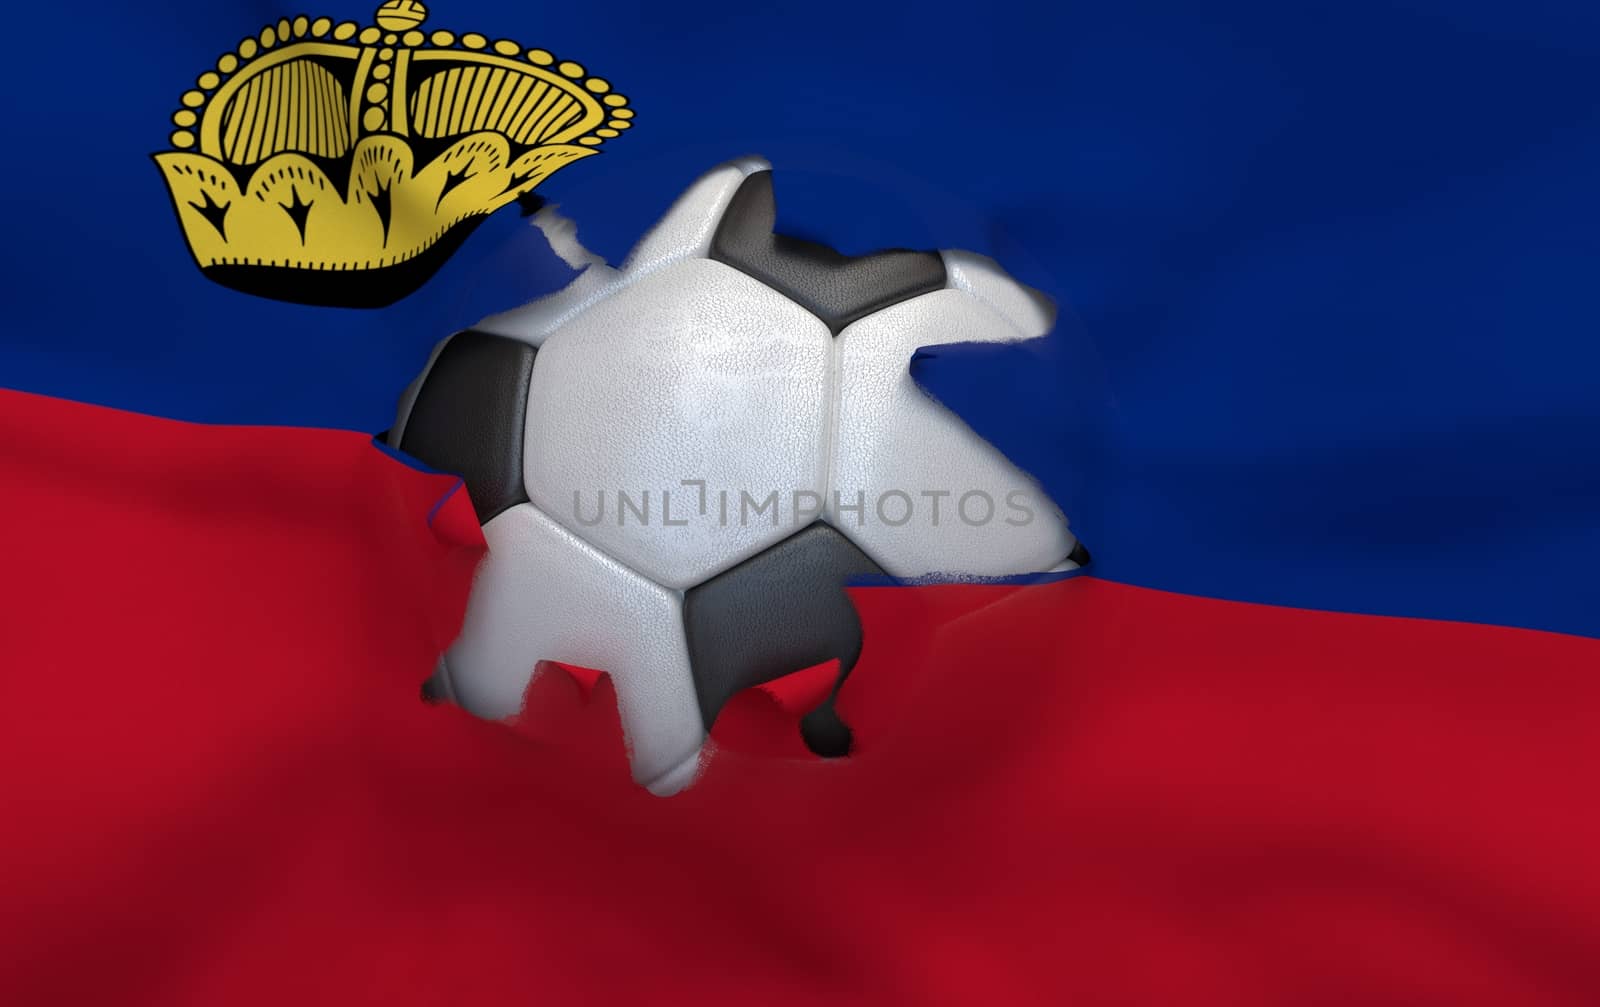 The hole in the flag of Liechtenstein and soccer ball by Barbraford